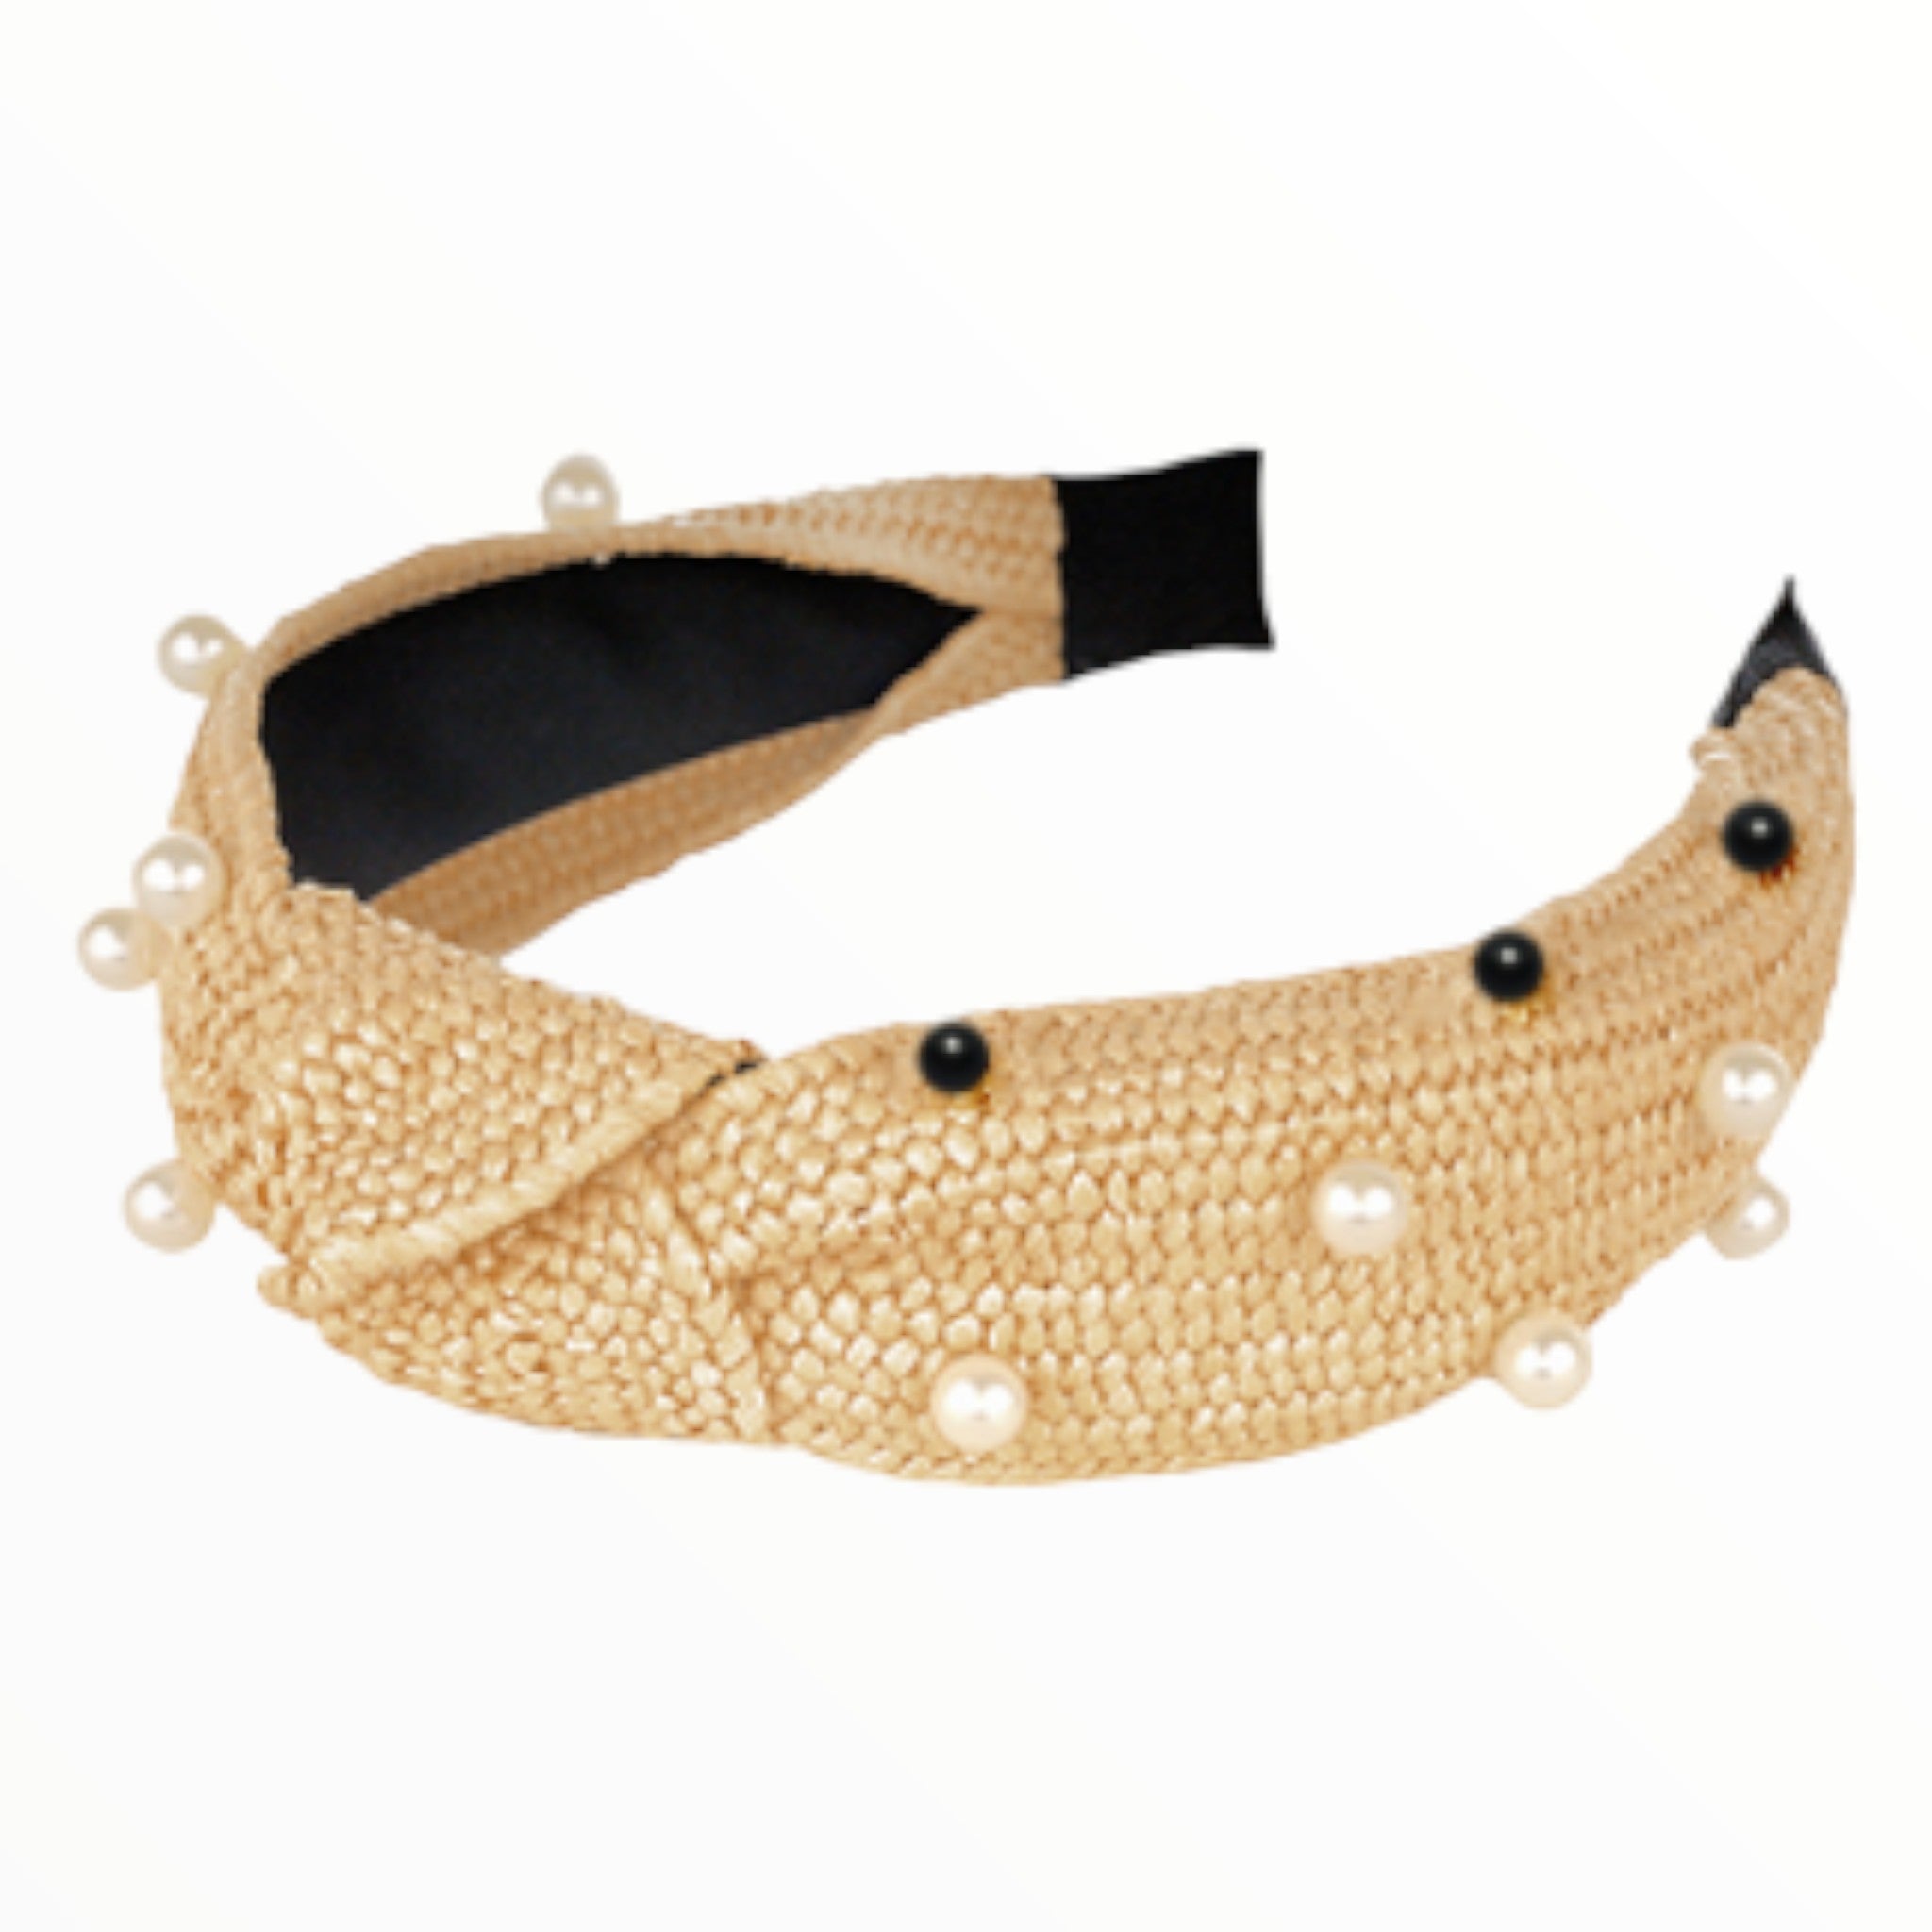 Beige & Black Pearl Embellished Top Knot Headband-Accessories-LouisGeorge Boutique-LouisGeorge Boutique, Women’s Fashion Boutique Located in Trussville, Alabama